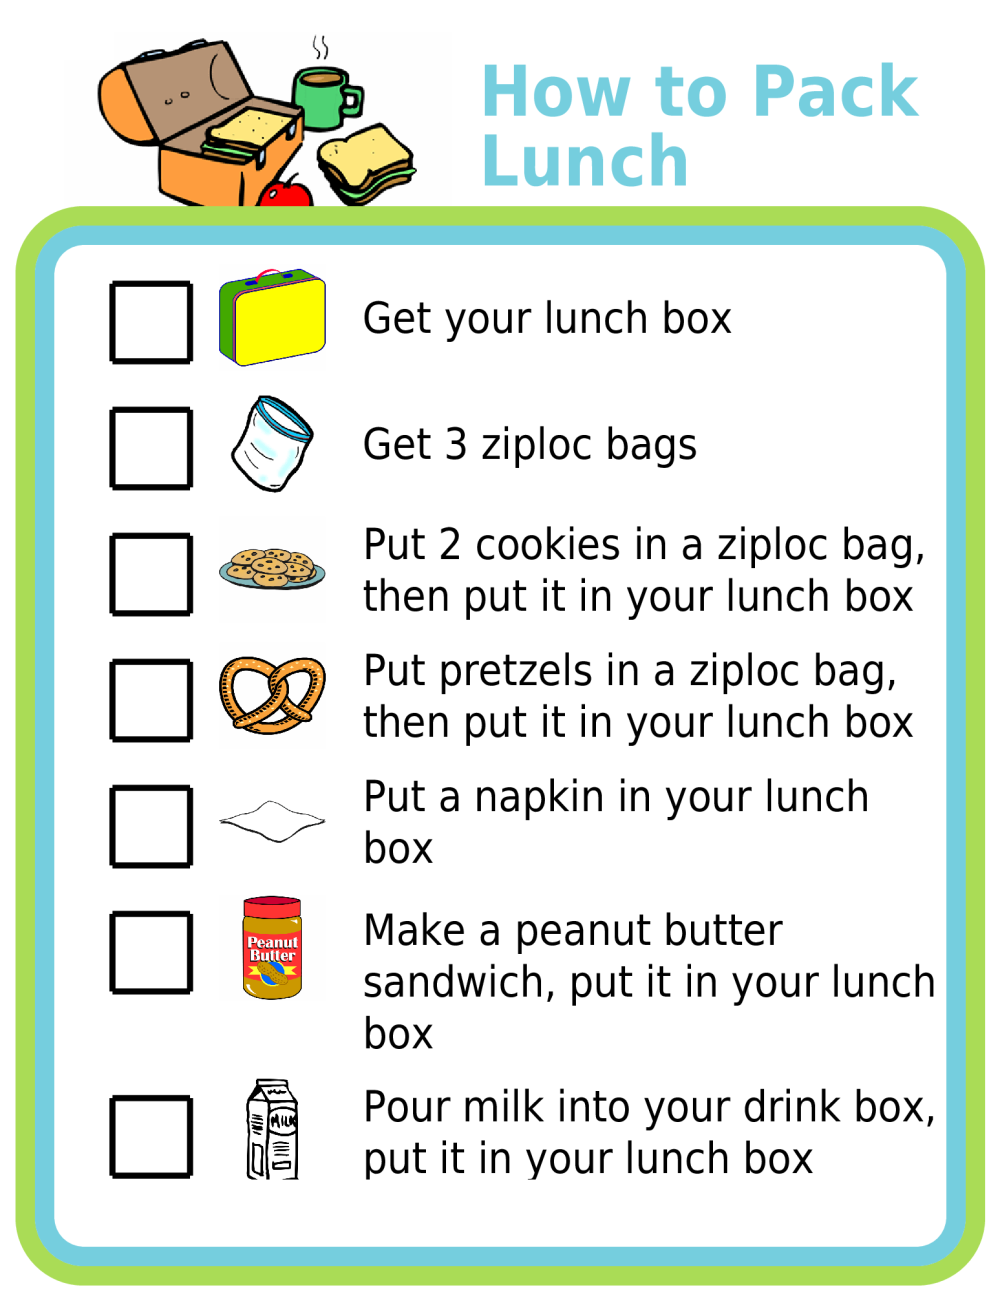 Picture checklist for how to pack lunch